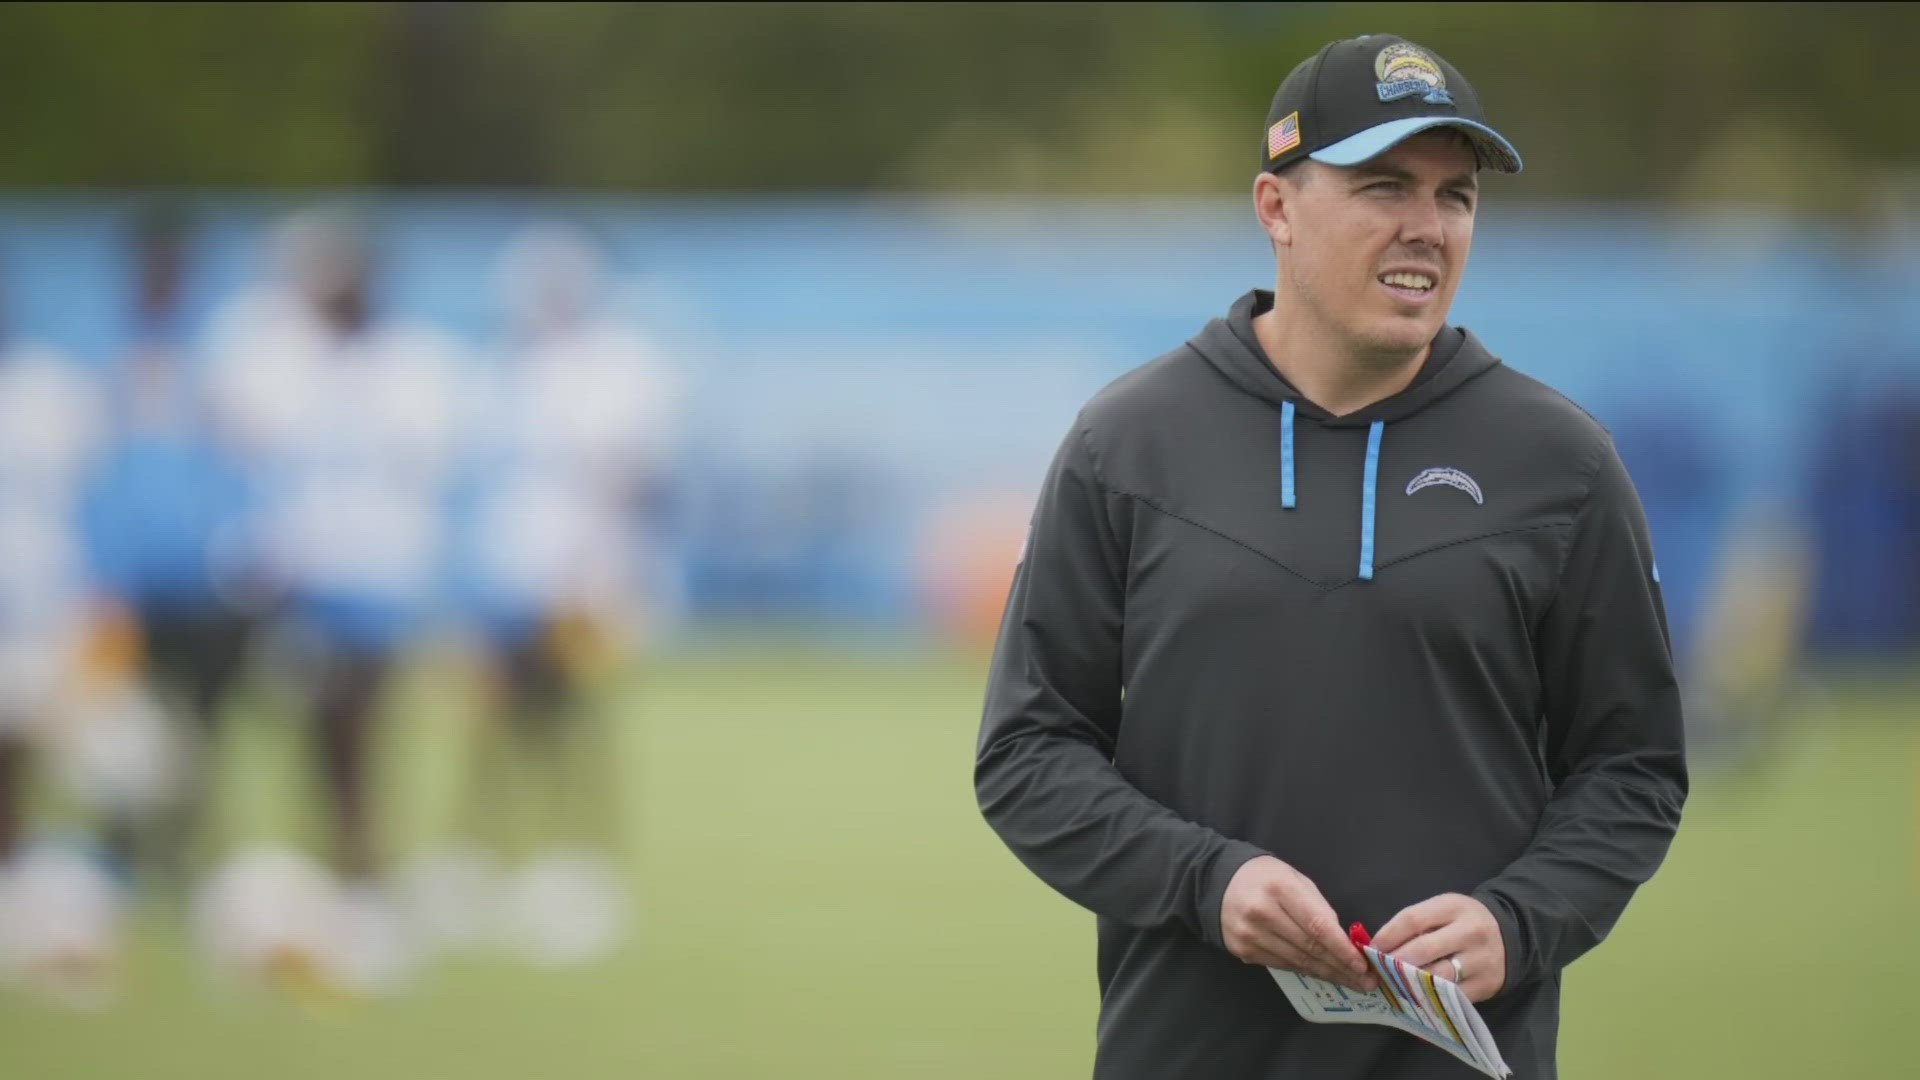 Moore explained his role as an offensive coordinator during the offseason and the "easy sell" of moving his family and three kids close to Disneyland.